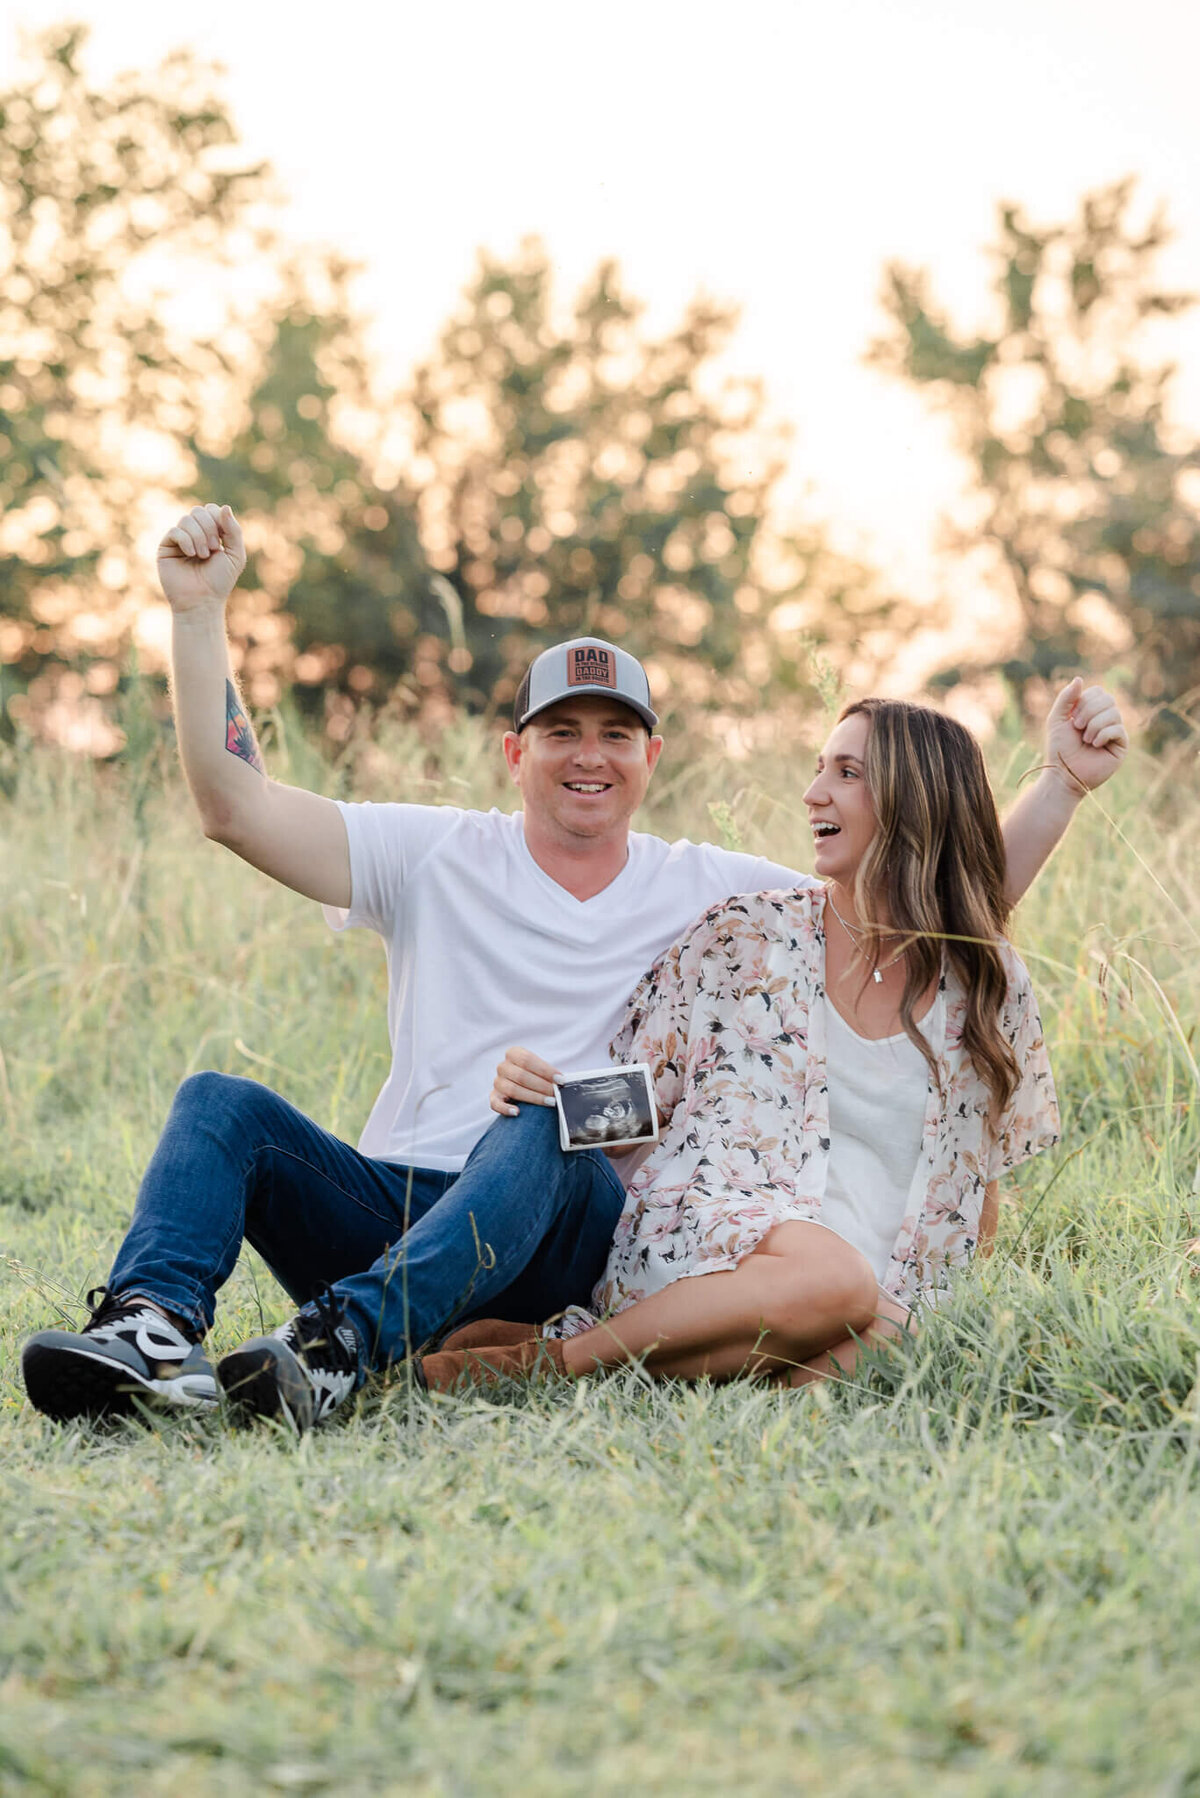 A father-to-be pumps his arms in excitement while his partner holds up their sonogram in their pregnancy announcement photo.